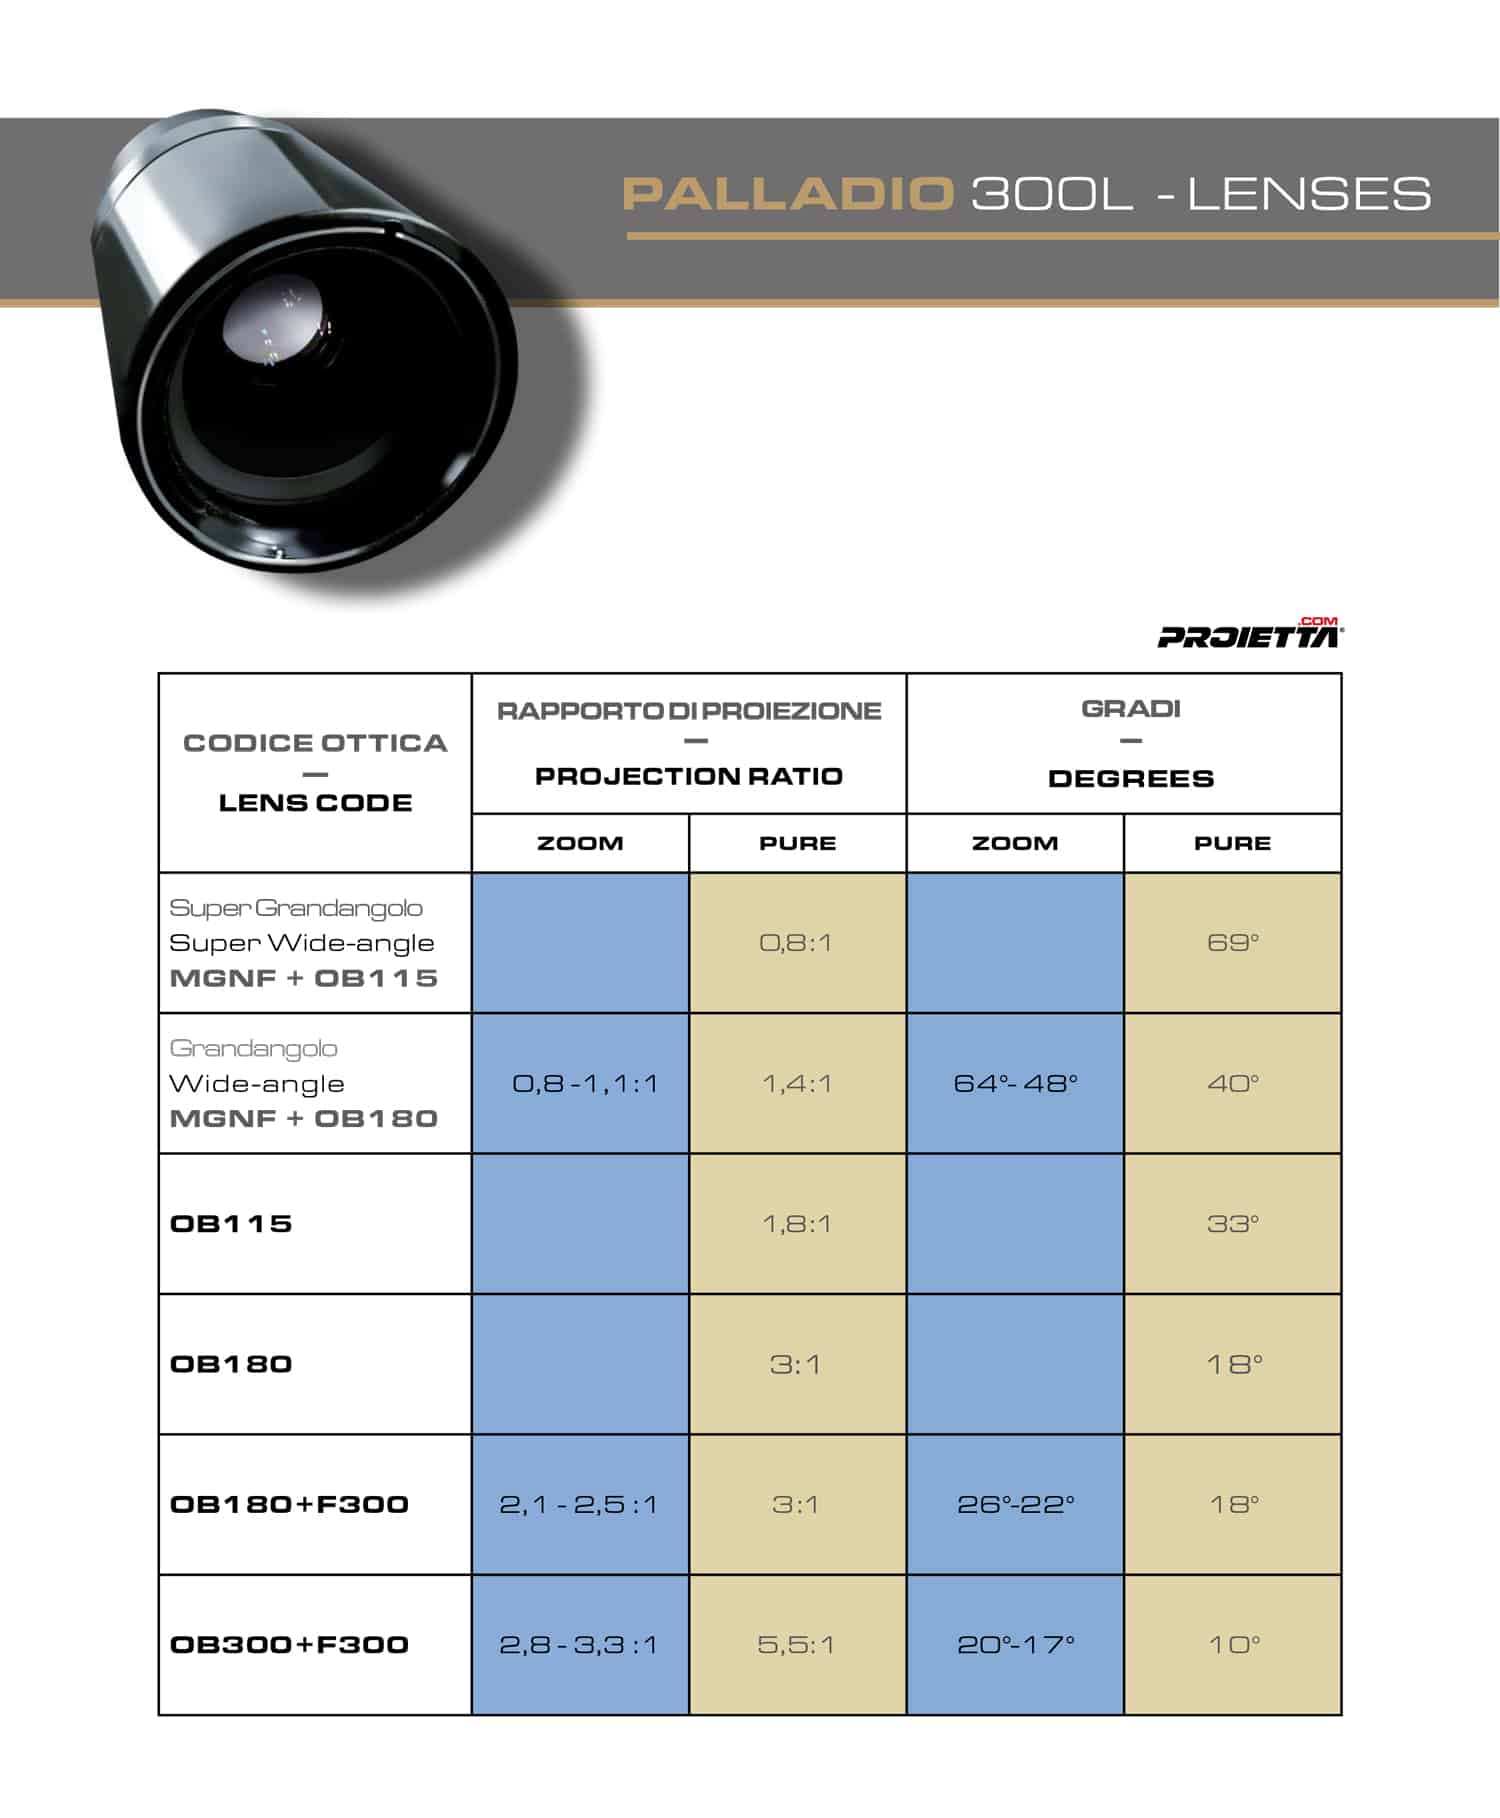 Lenses available for Palladio projector